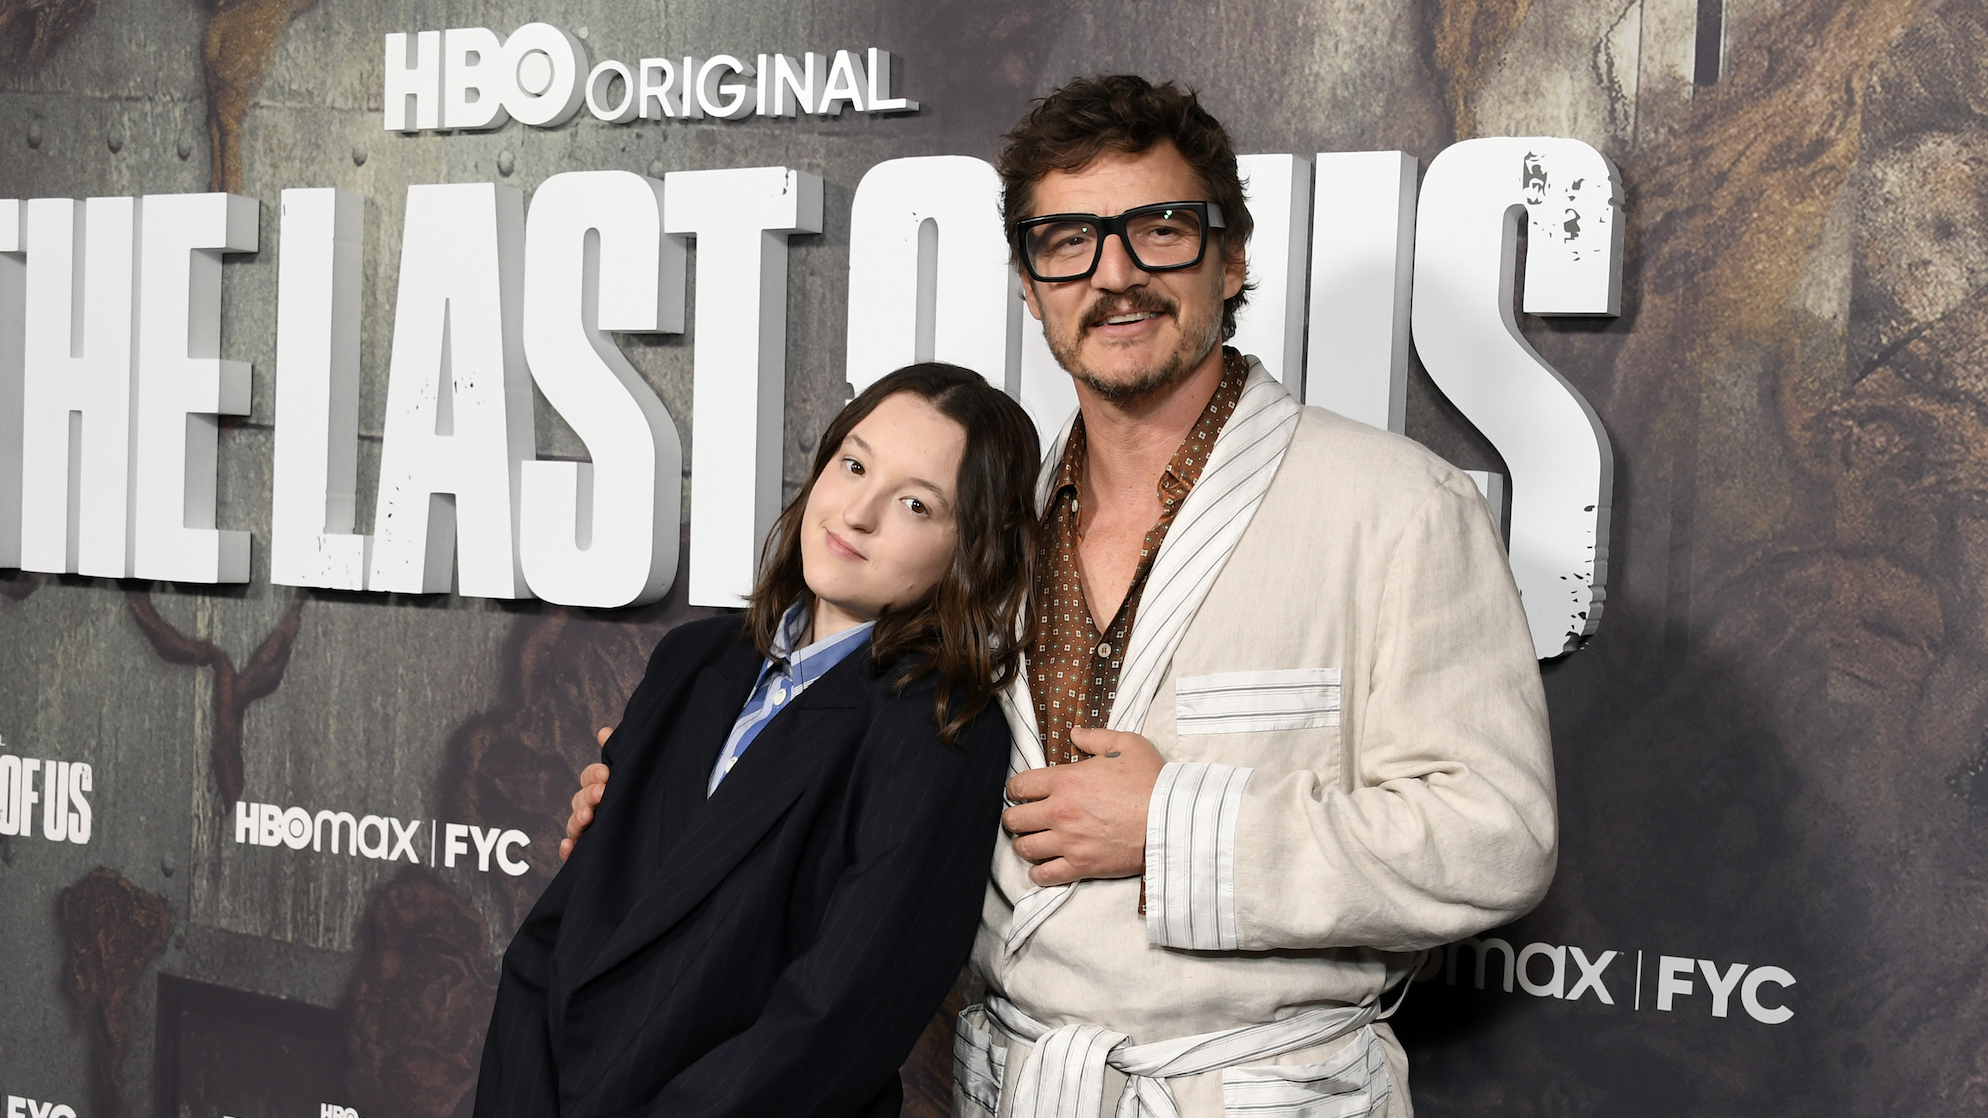 The Best Part of 'The Last of Us' Is Pedro Pascal's Jacket 2023